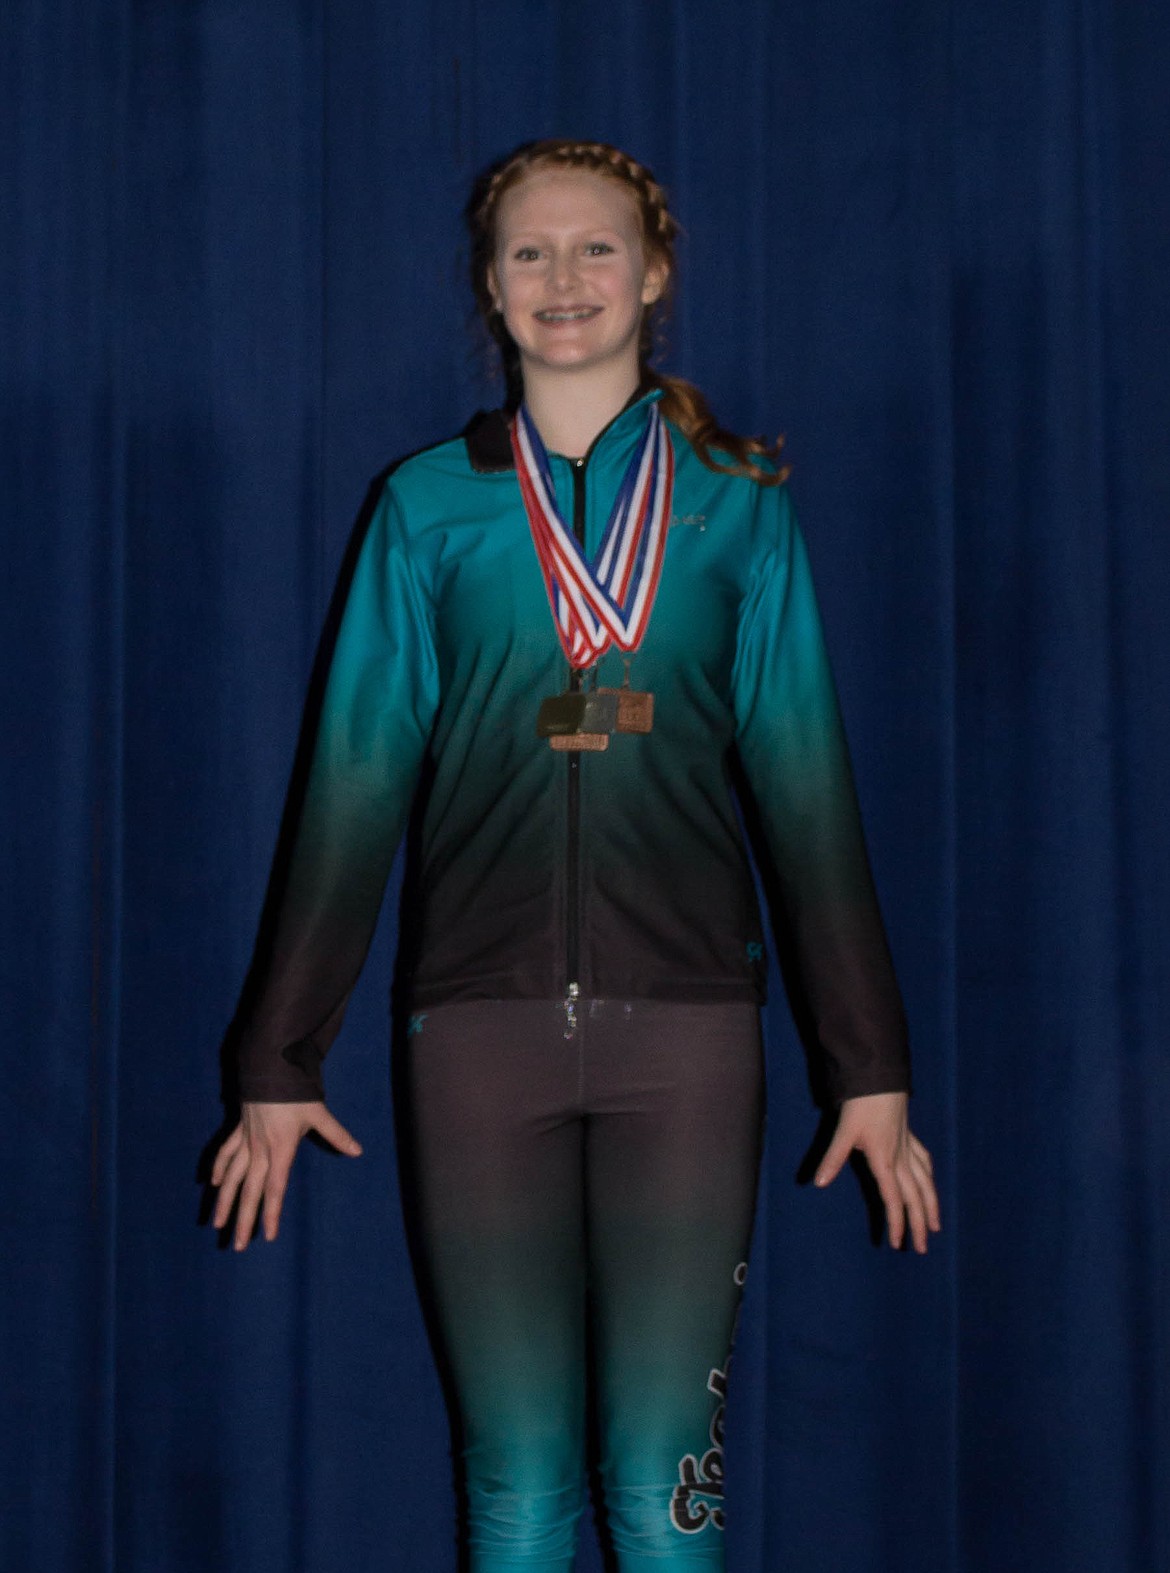 Courtesy photo
Amber Shoolroy of Technique Gymnastics won the Xcel Gold bar competition at the recent Xcel state championships in Meridian.